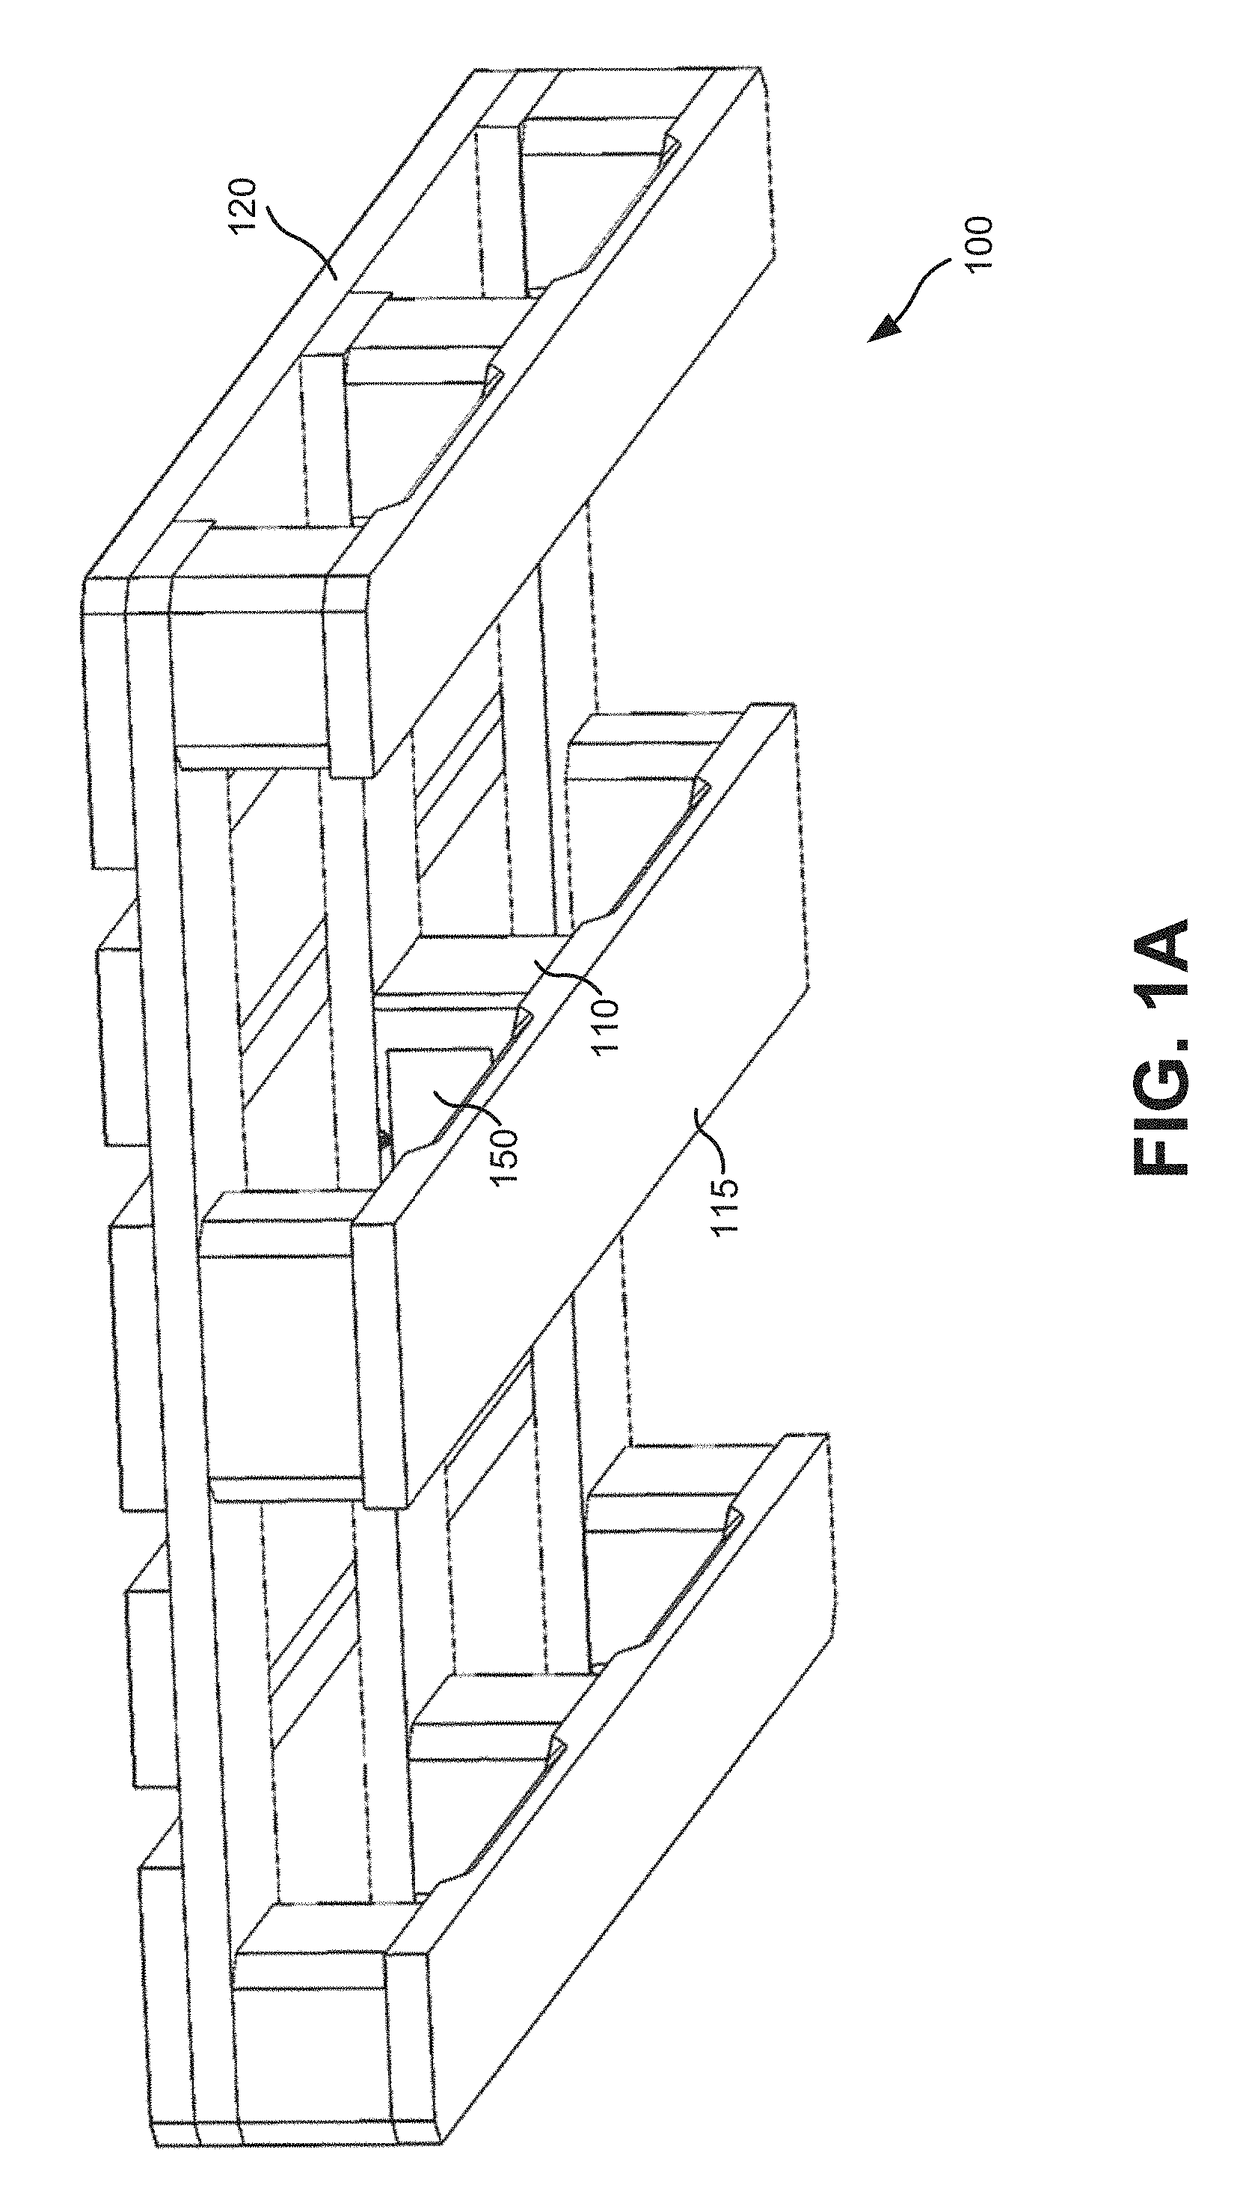 Systems and Methods for Quality Monitoring of Assets